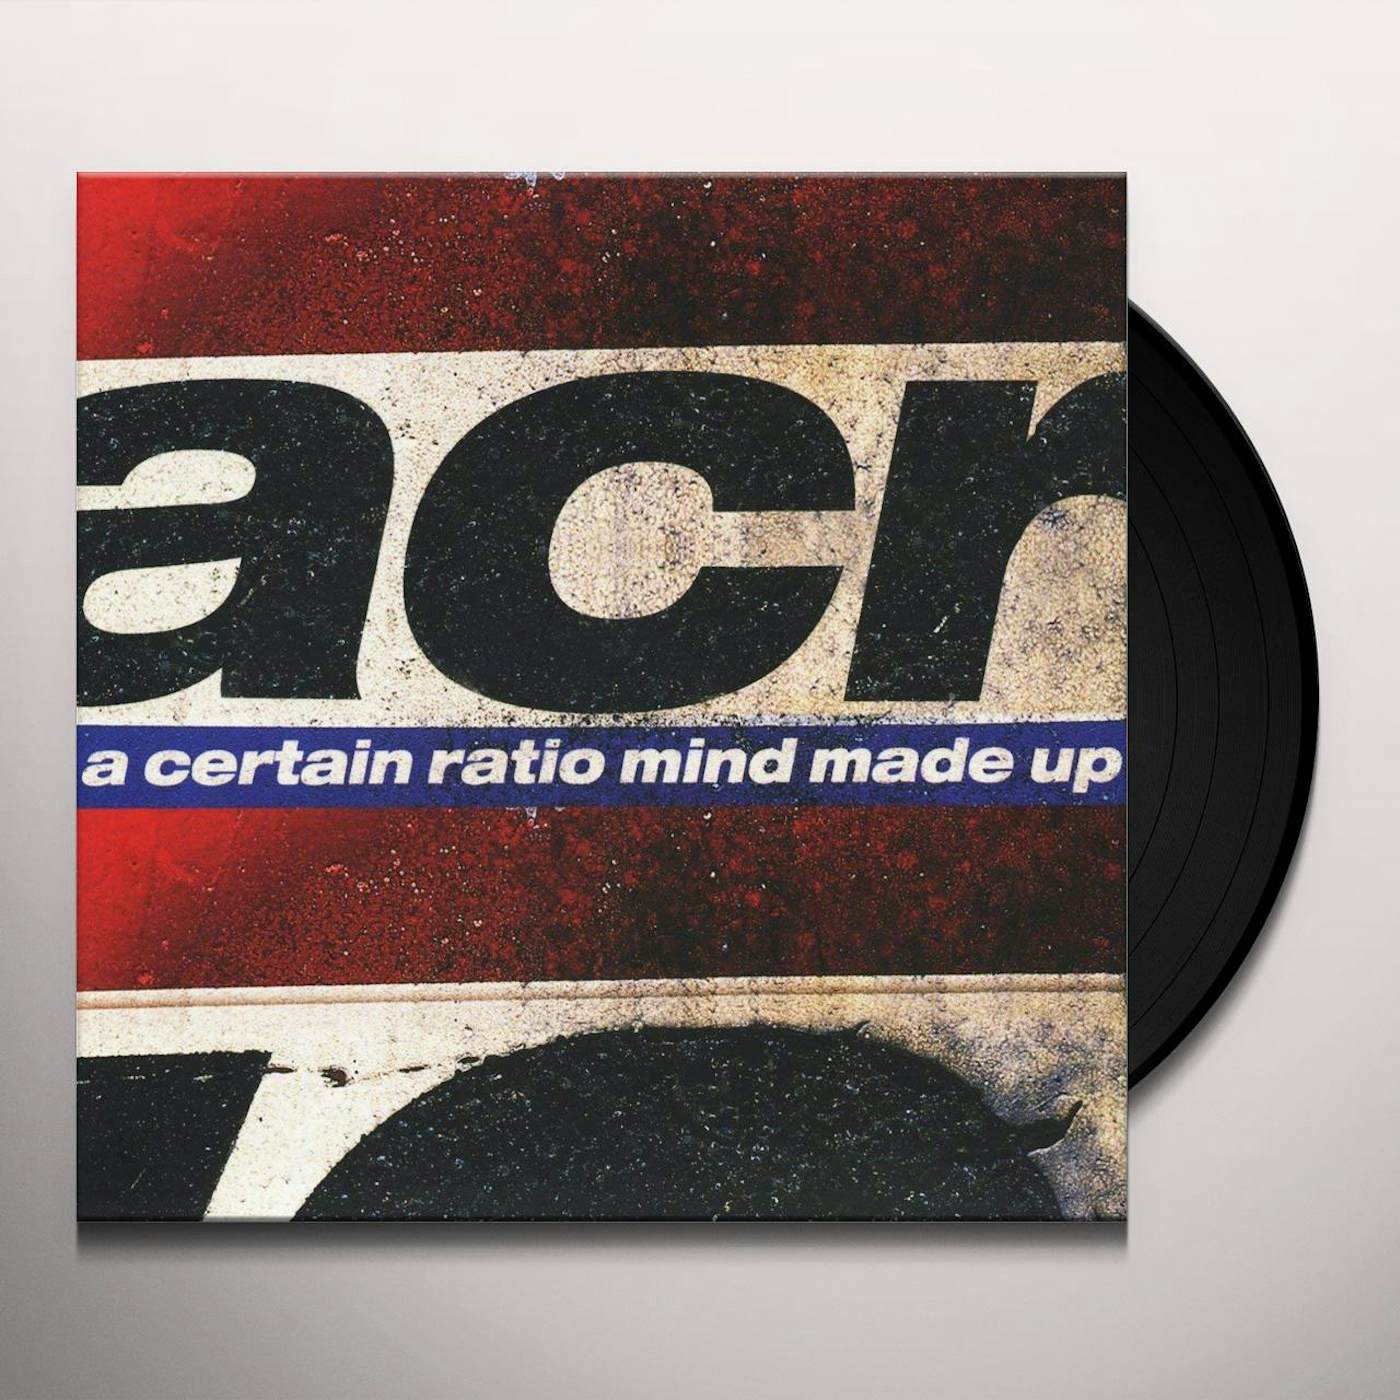 A Certain Ratio Mind Made Up Vinyl Record